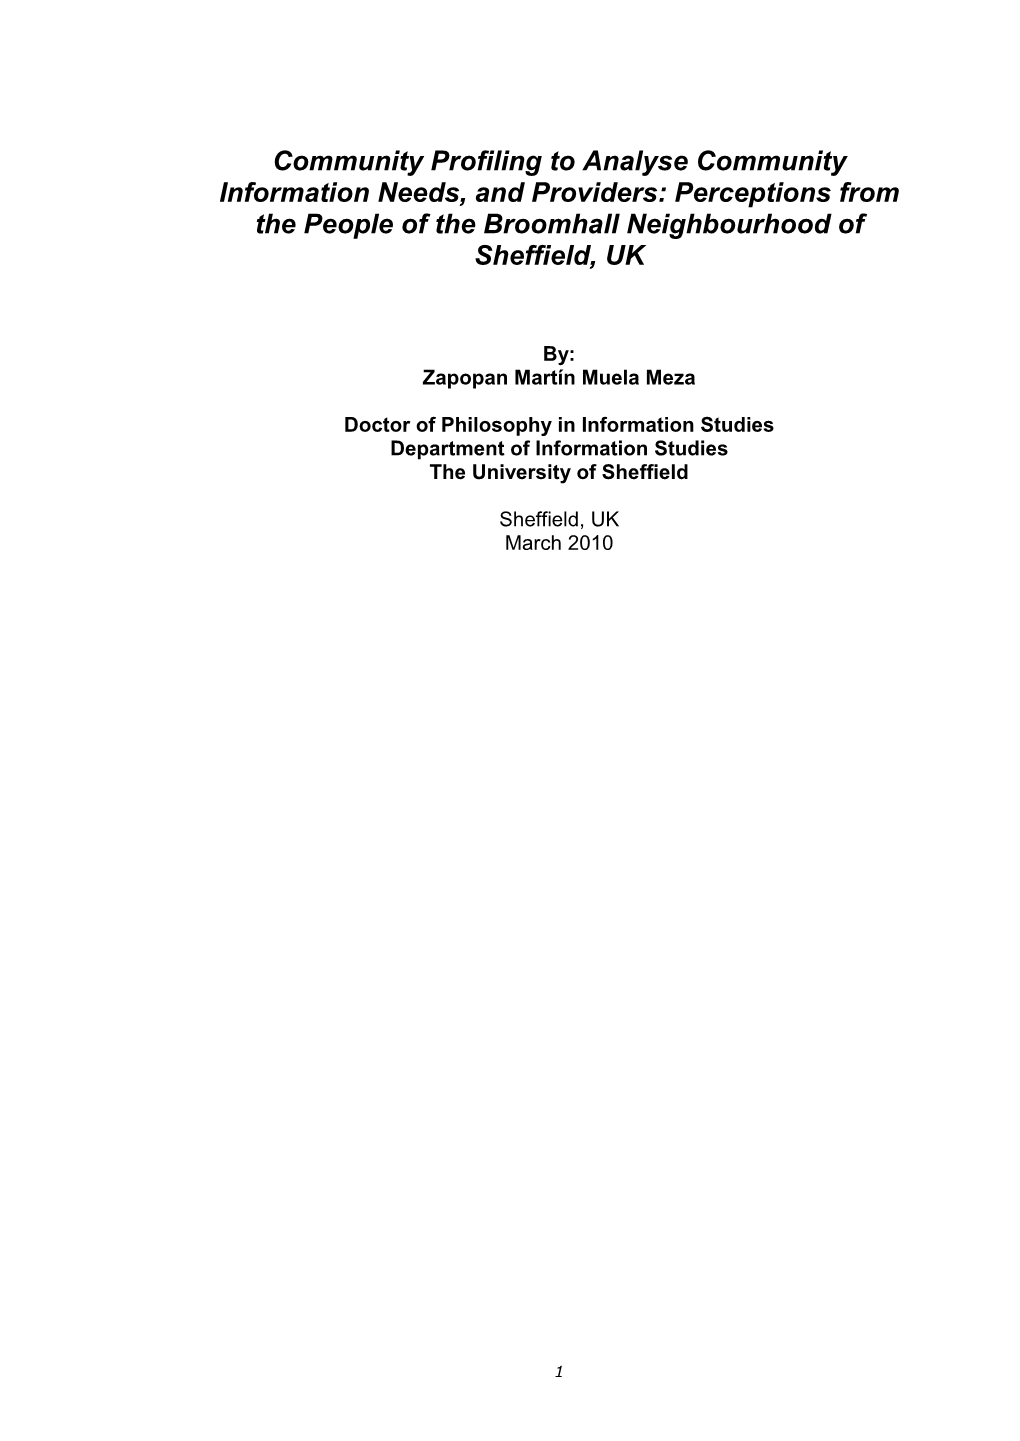 Community Profiling to Analyse Community Information Needs, and Providers: Perceptions from the People of the Broomhall Neighbourhood of Sheffield, UK